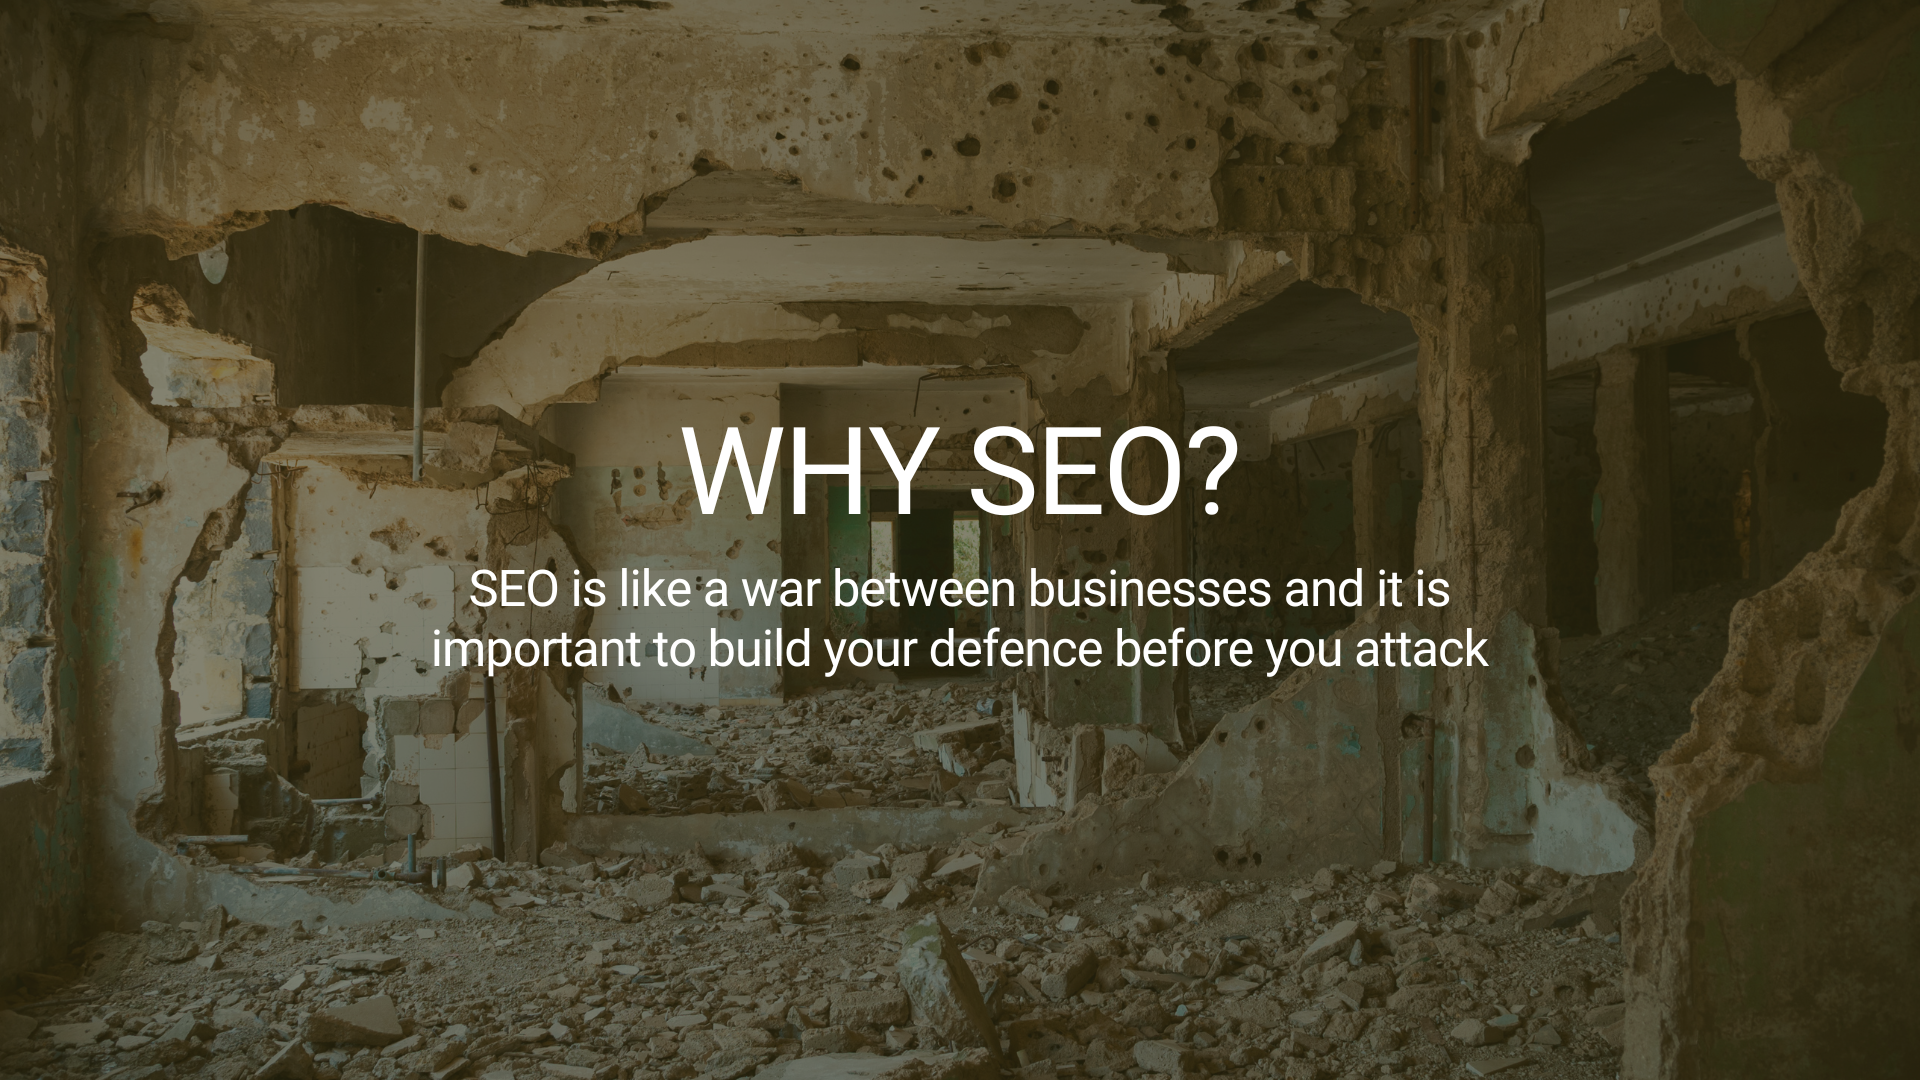 WHY SEO? SEO is a war between businesses and it is important to build defence before attacking, an image of a torn building